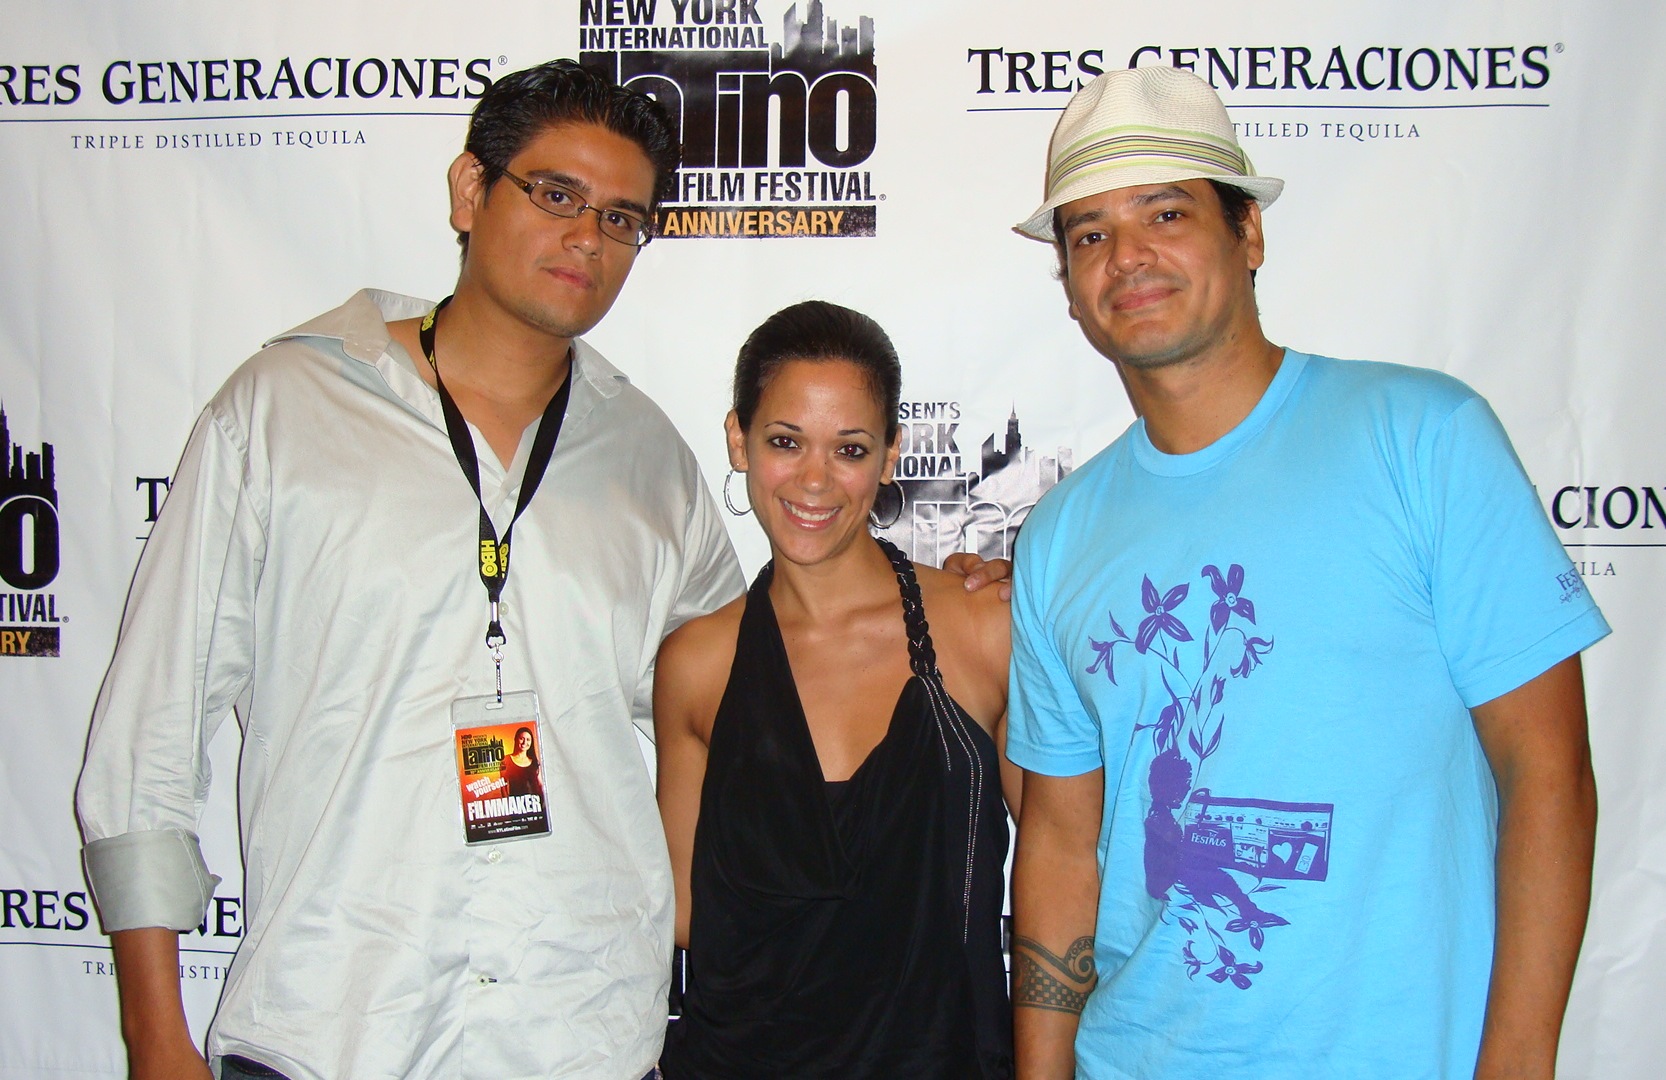 At the HBO Latino Film Festival w/ my co-star and director.